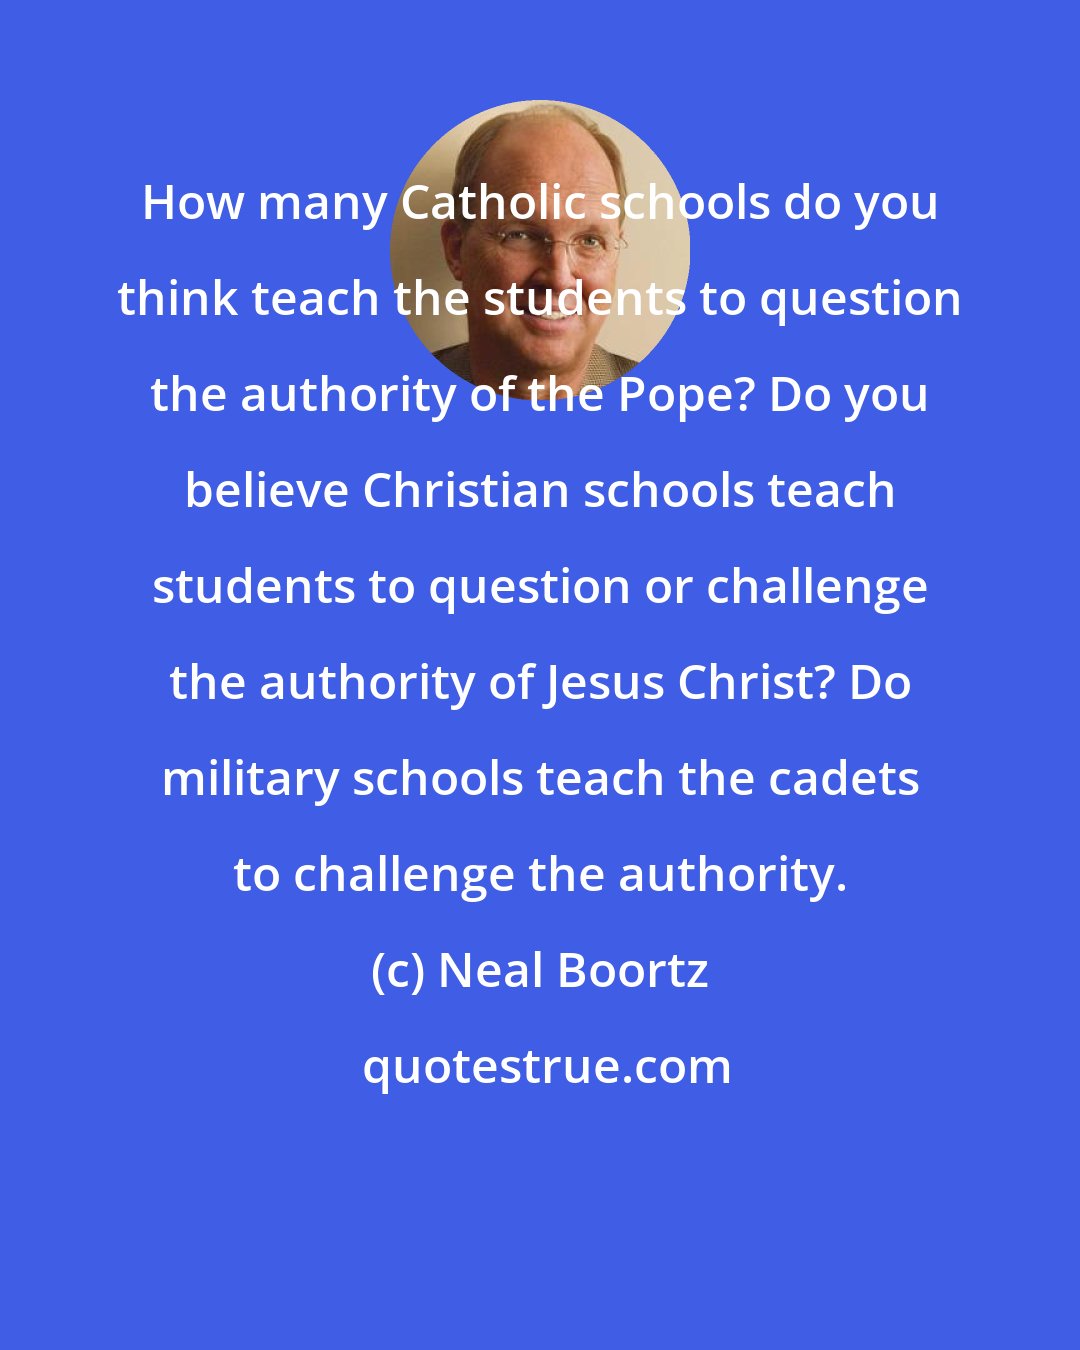 Neal Boortz: How many Catholic schools do you think teach the students to question the authority of the Pope? Do you believe Christian schools teach students to question or challenge the authority of Jesus Christ? Do military schools teach the cadets to challenge the authority.